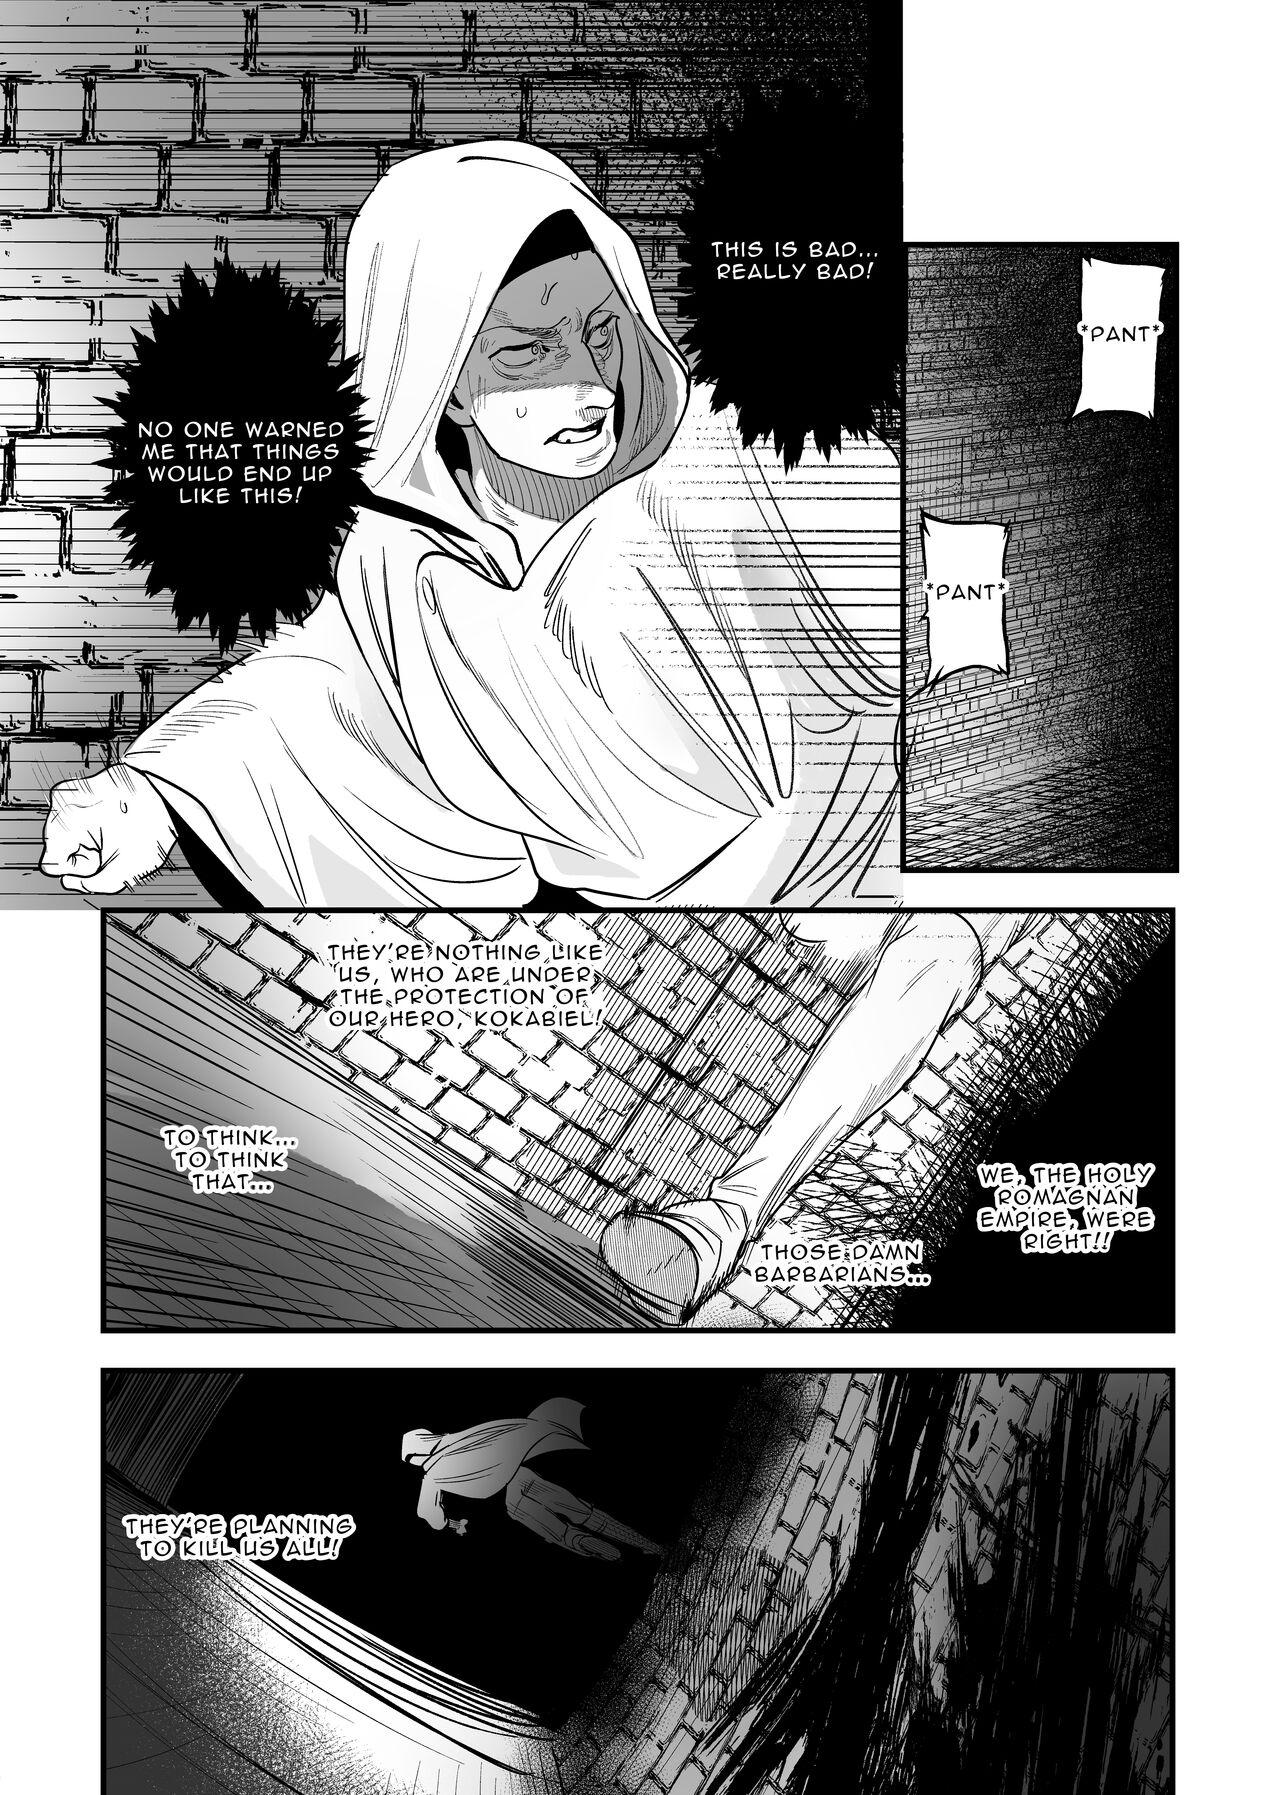 Sex Tape The Man Who Saved Me on my Isekai Trip was a Killer... 2 - Original Pinay - Page 3